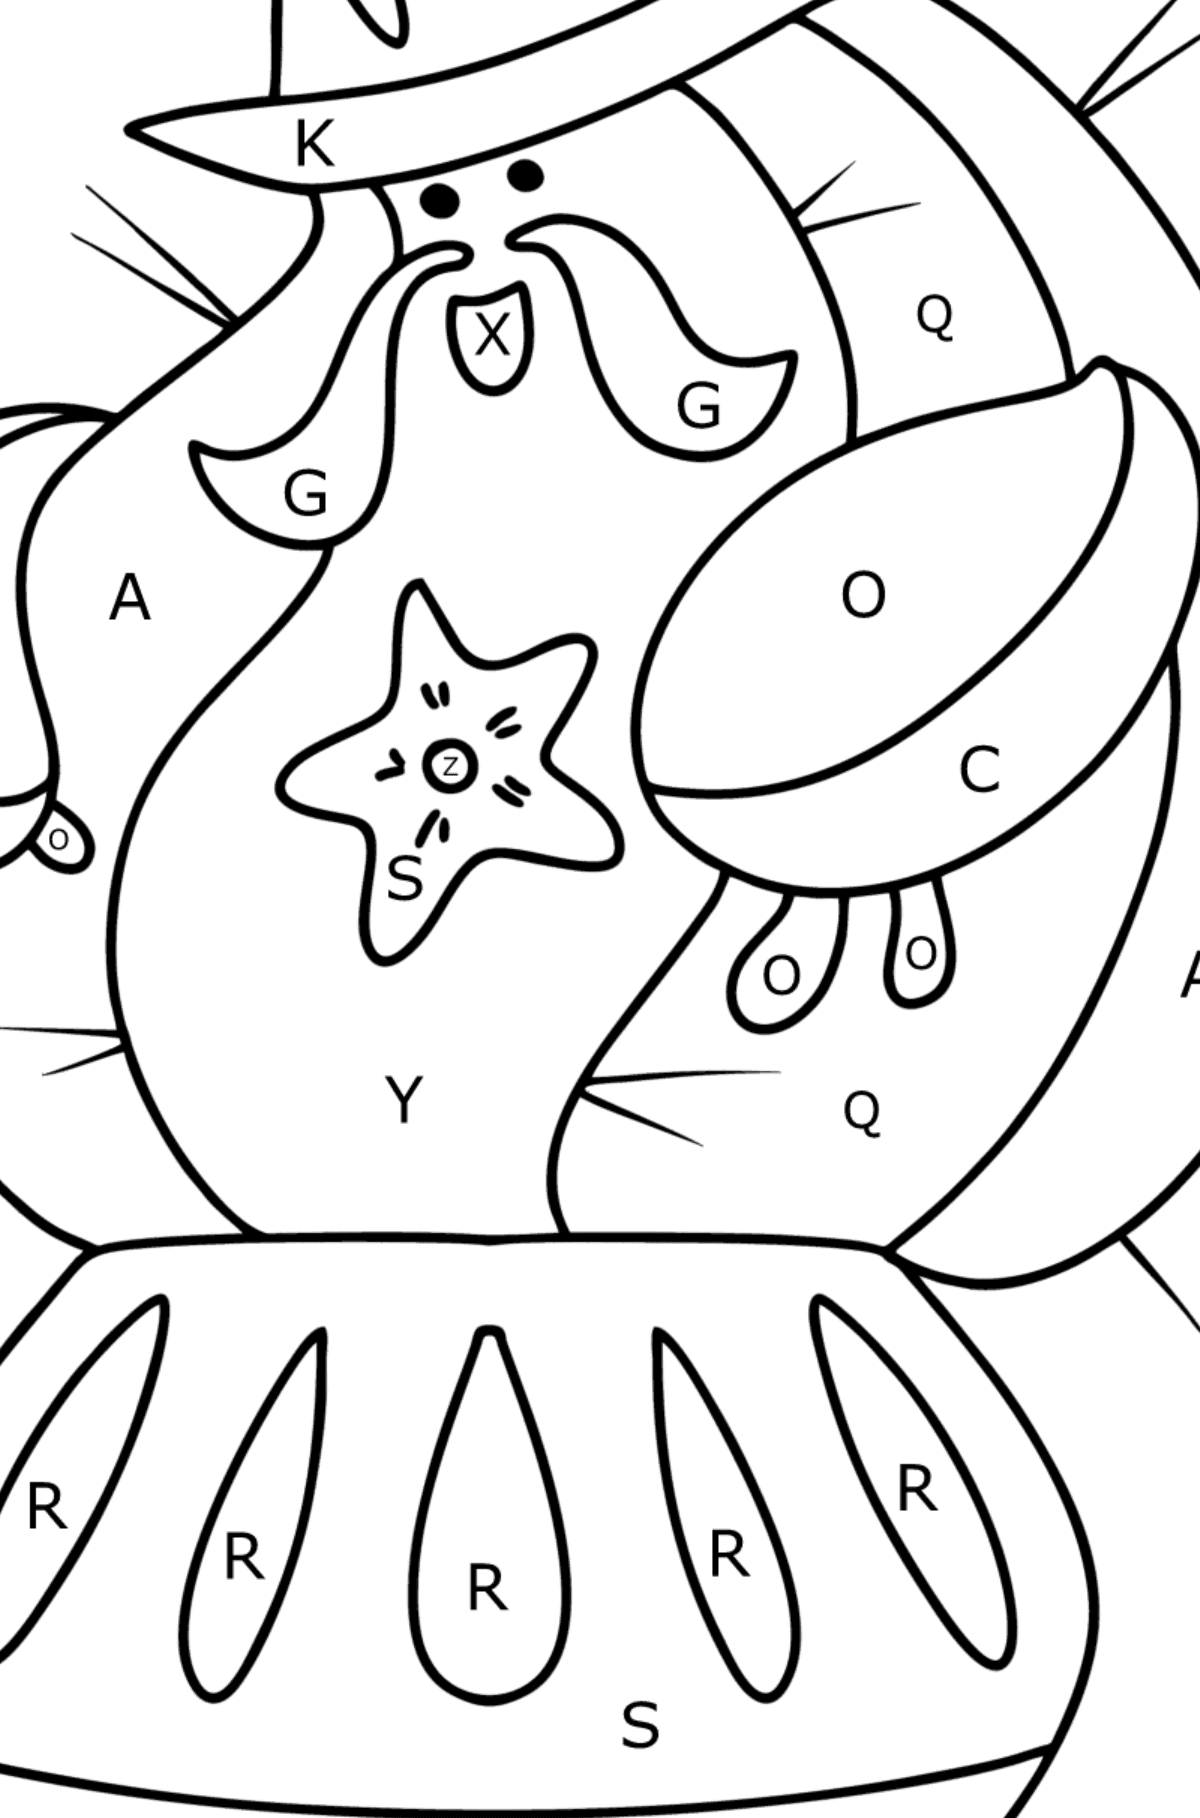 Sheriff Cactus coloring page - Coloring by Letters for Kids